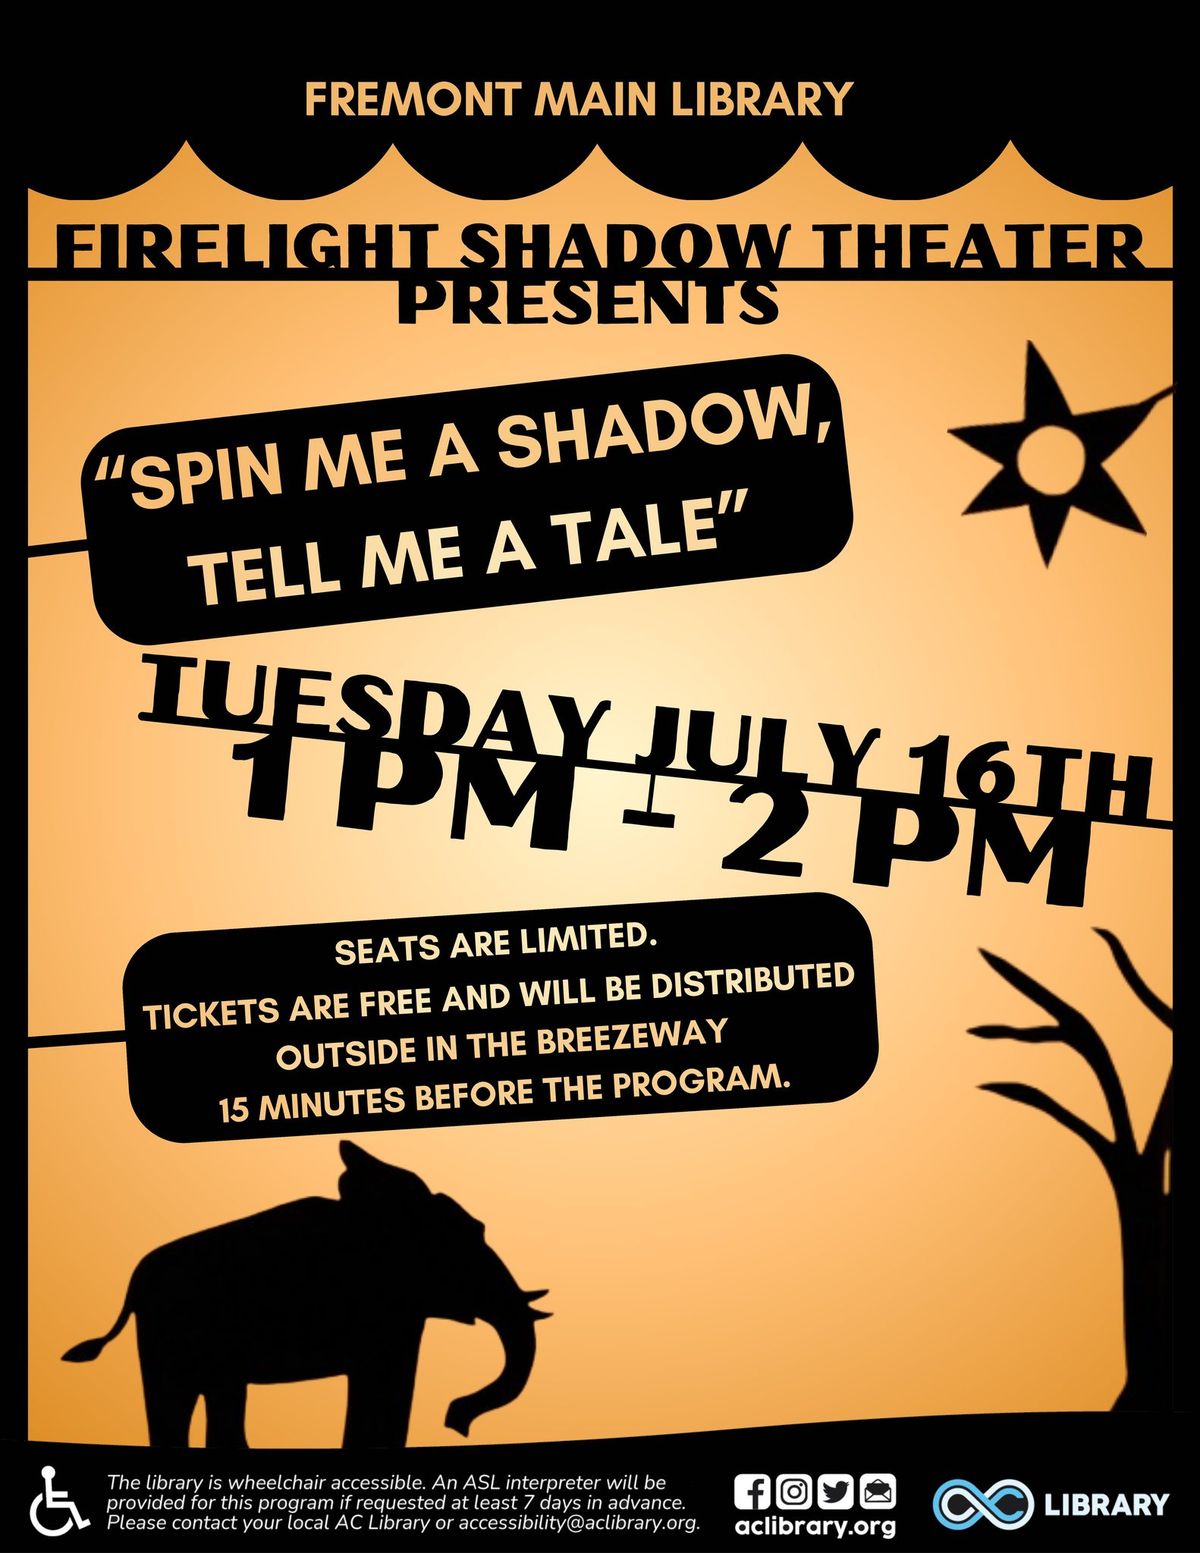 Firelight Shadow Theater: Spin Me a Shadow, Tell Me a Tale @ Fremont Main Library 